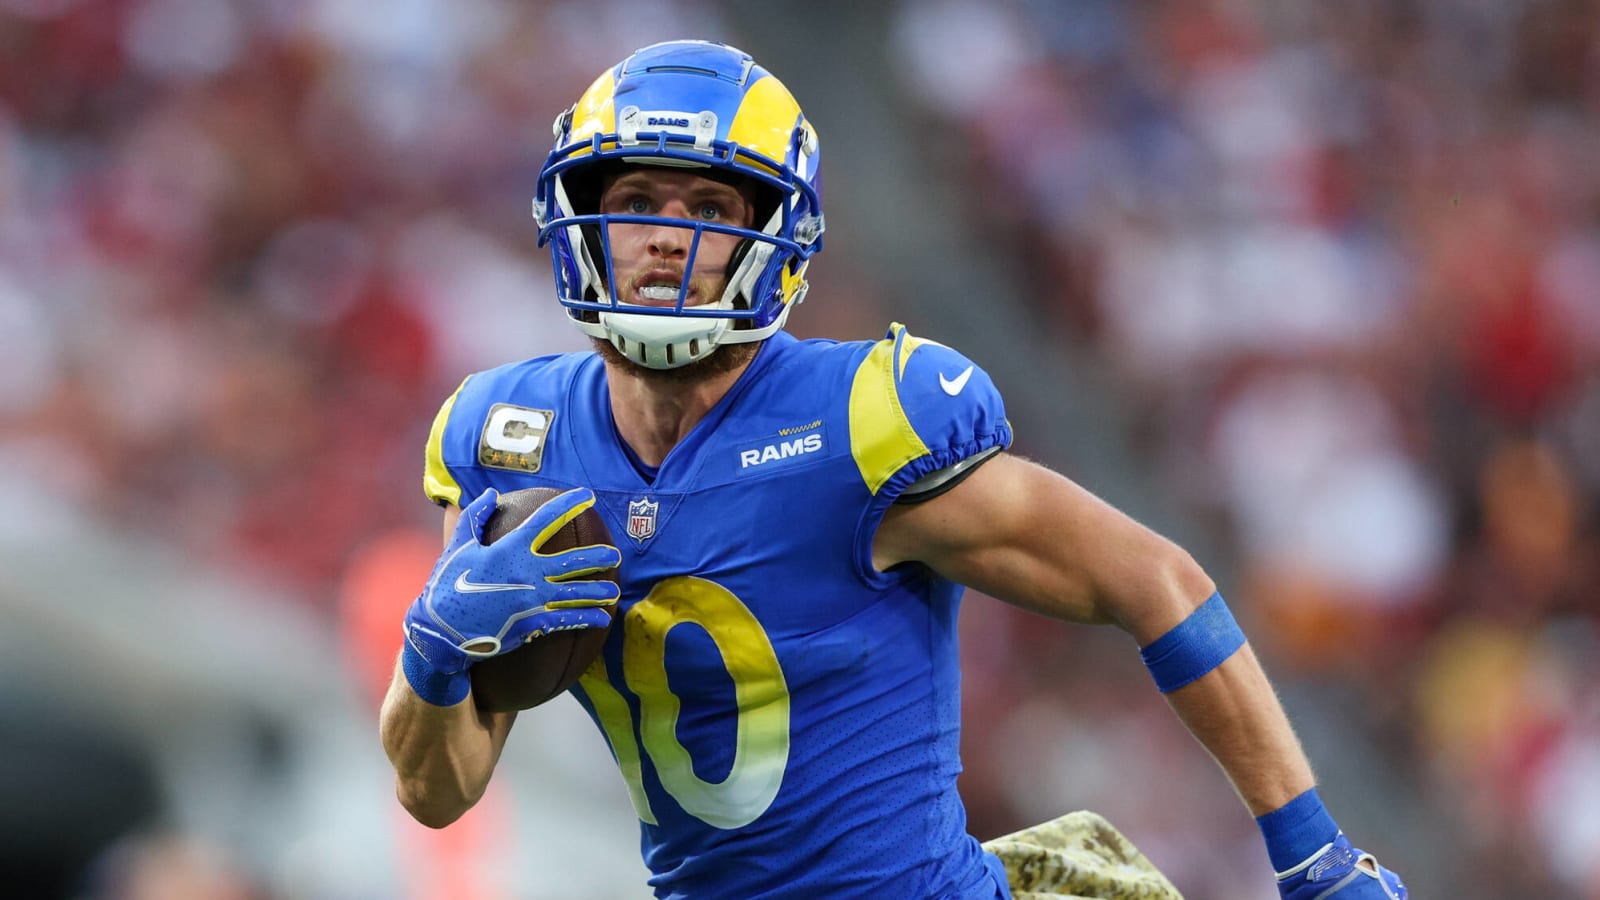 Cooper Kupp's injury is a potentially devastating blow to the Rams